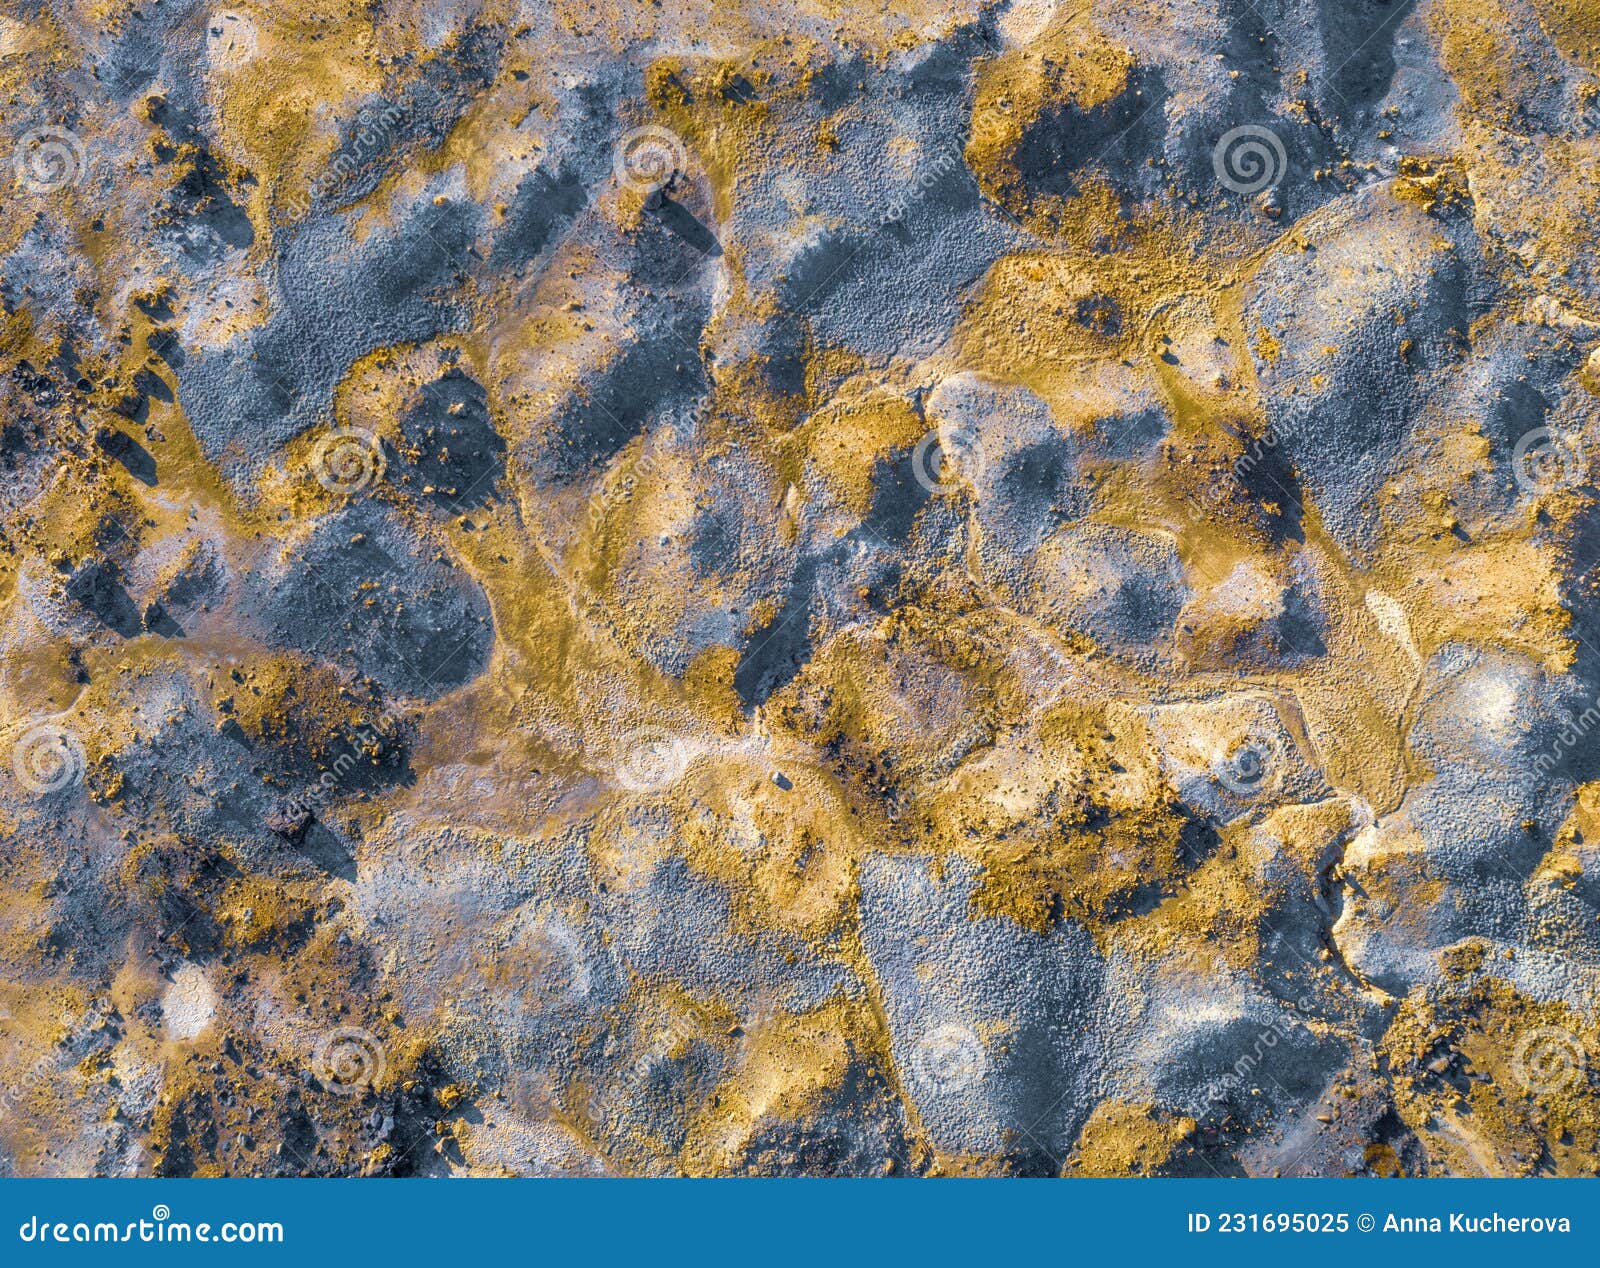 colorful texture of mining spoil heaps at abandoned pyrite mine, view directly above